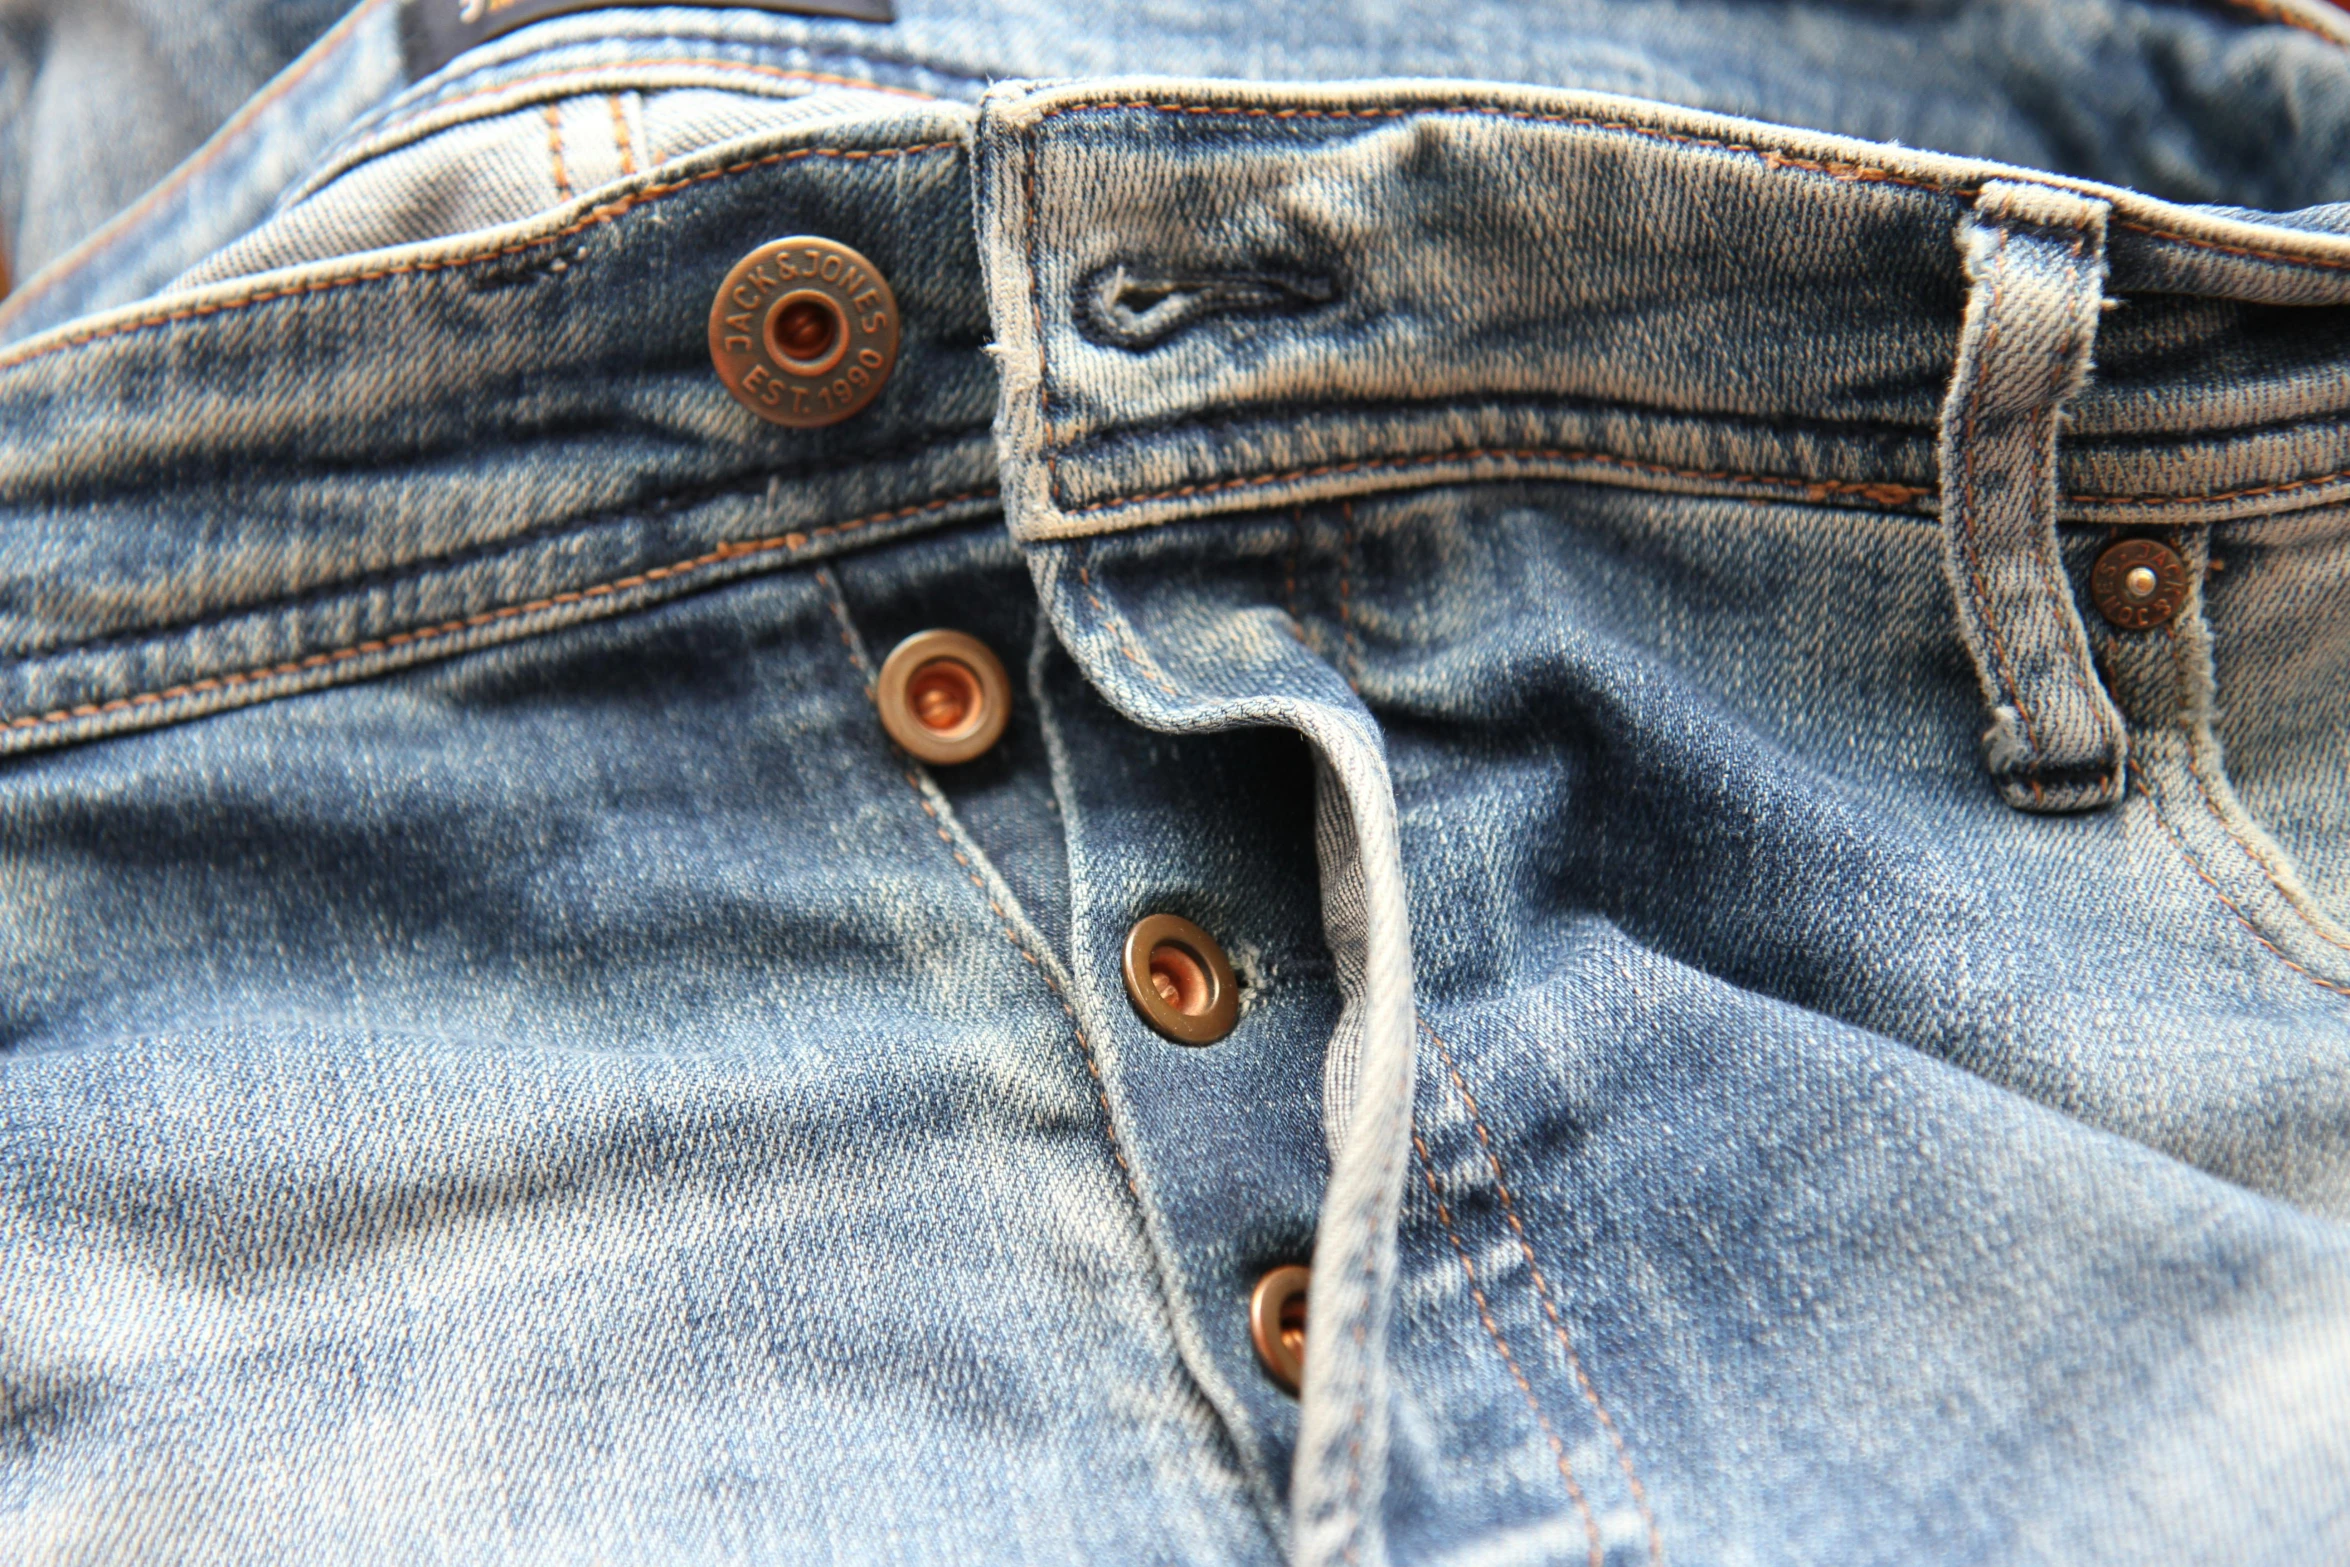 a close up of the bottom of jeans with ons on them